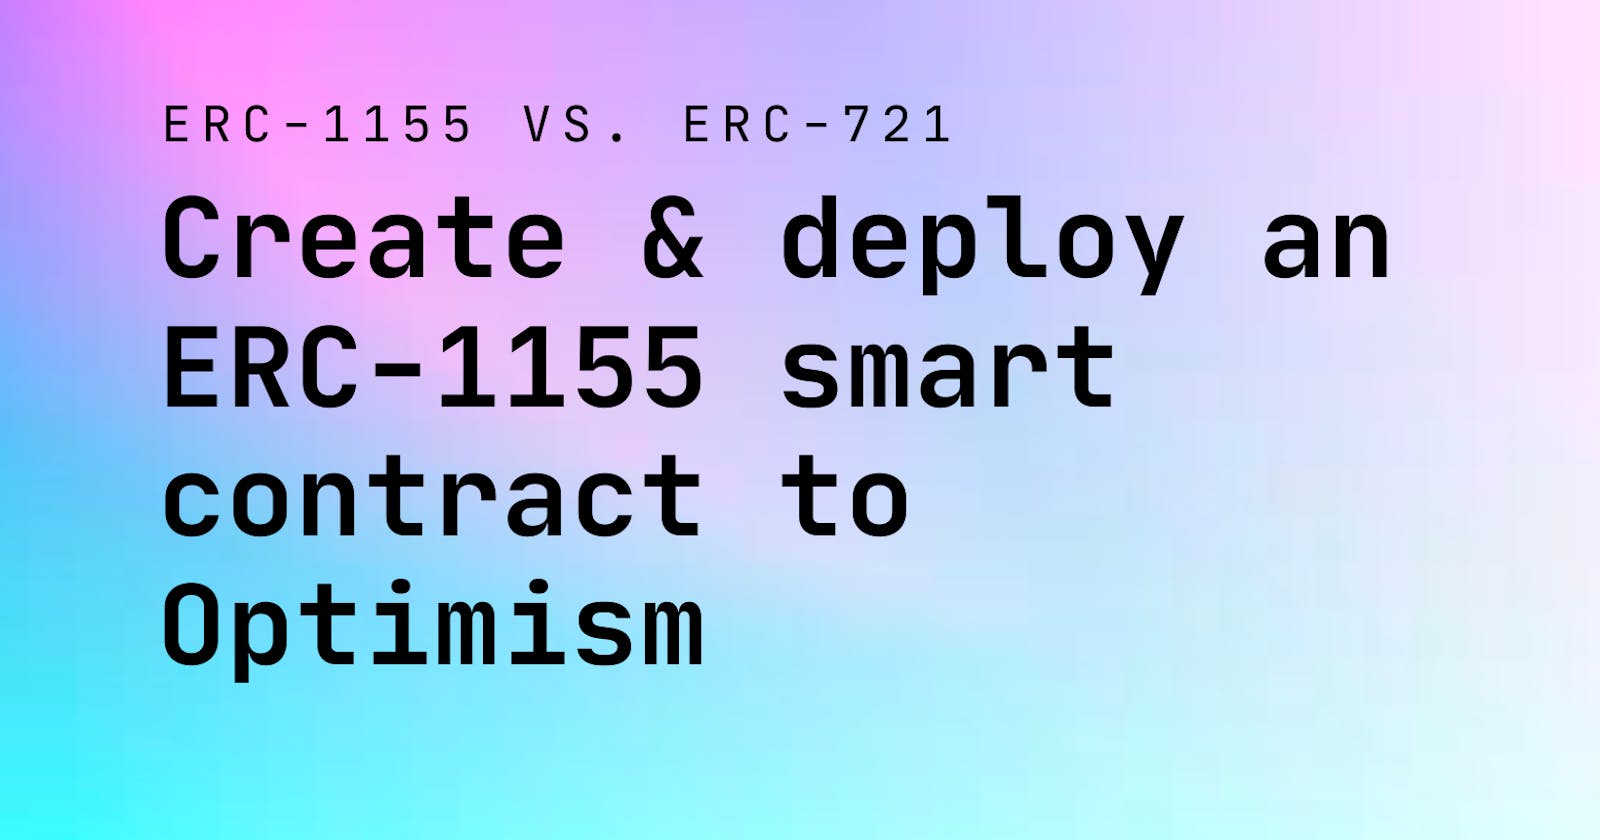 Create & deploy an ERC-1155 smart contract to Optimism using Foundry